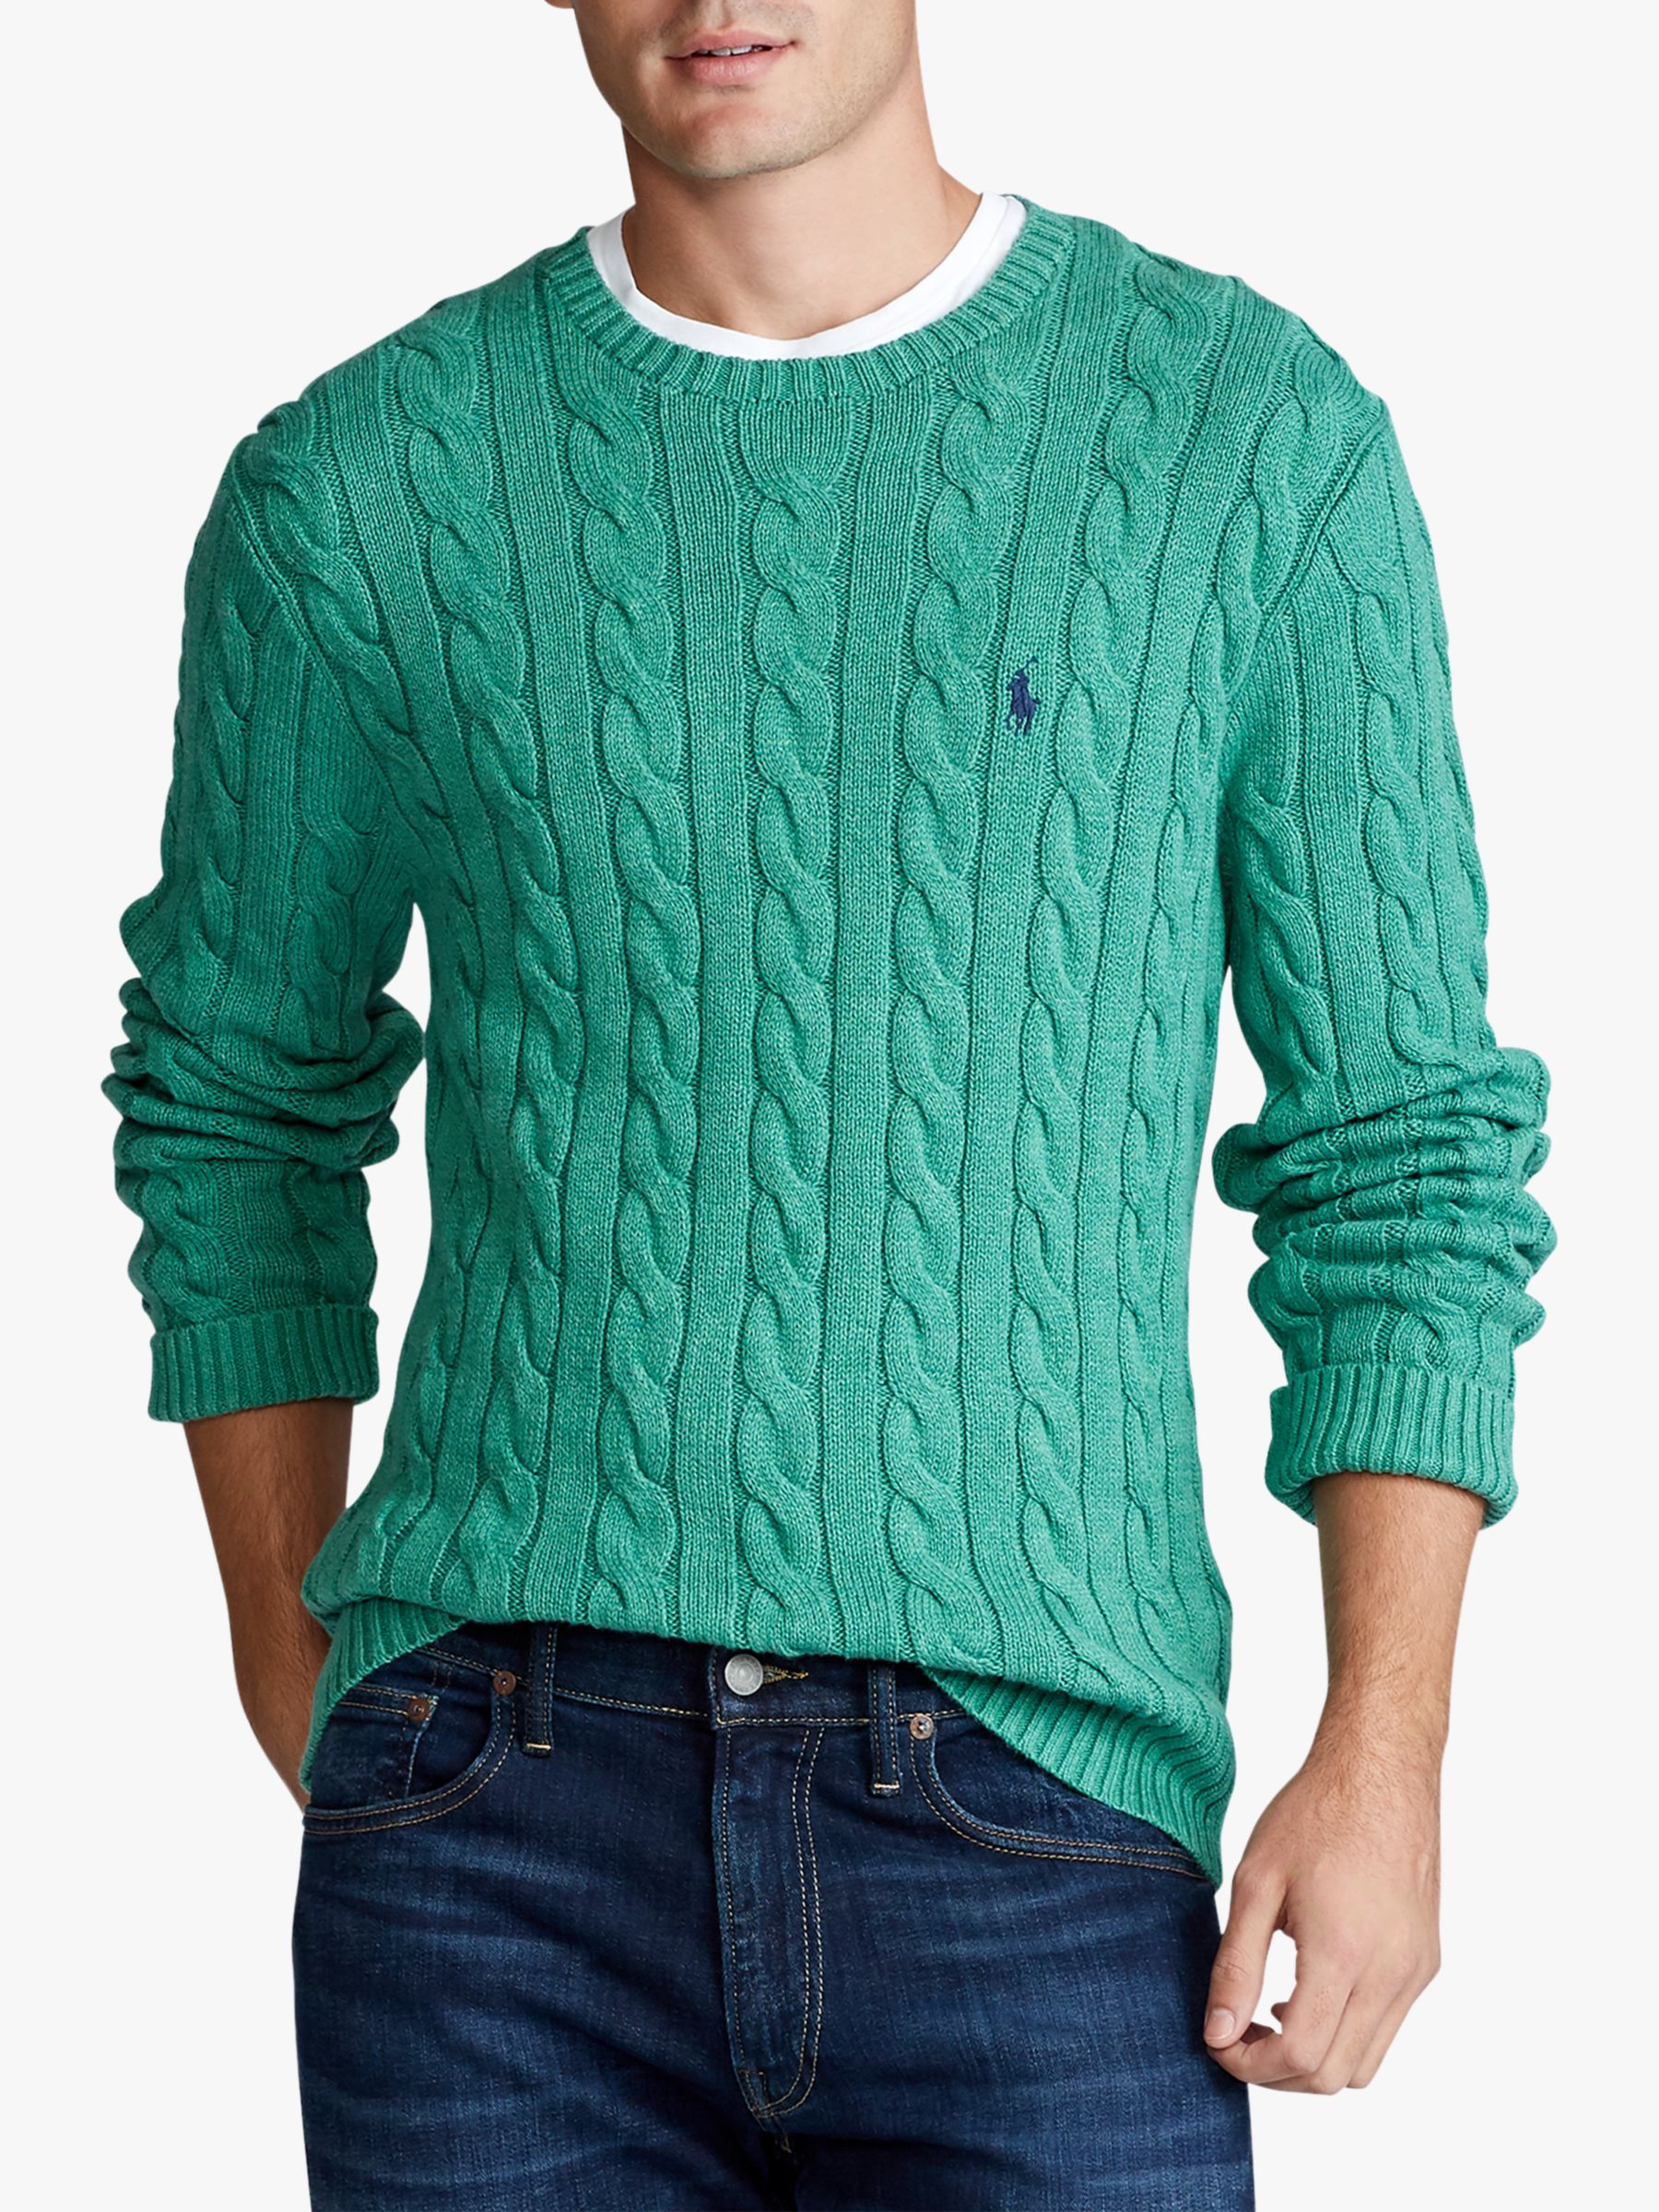  Polo  Ralph  Lauren  Cable Knit Cotton Sweater  at John Lewis 